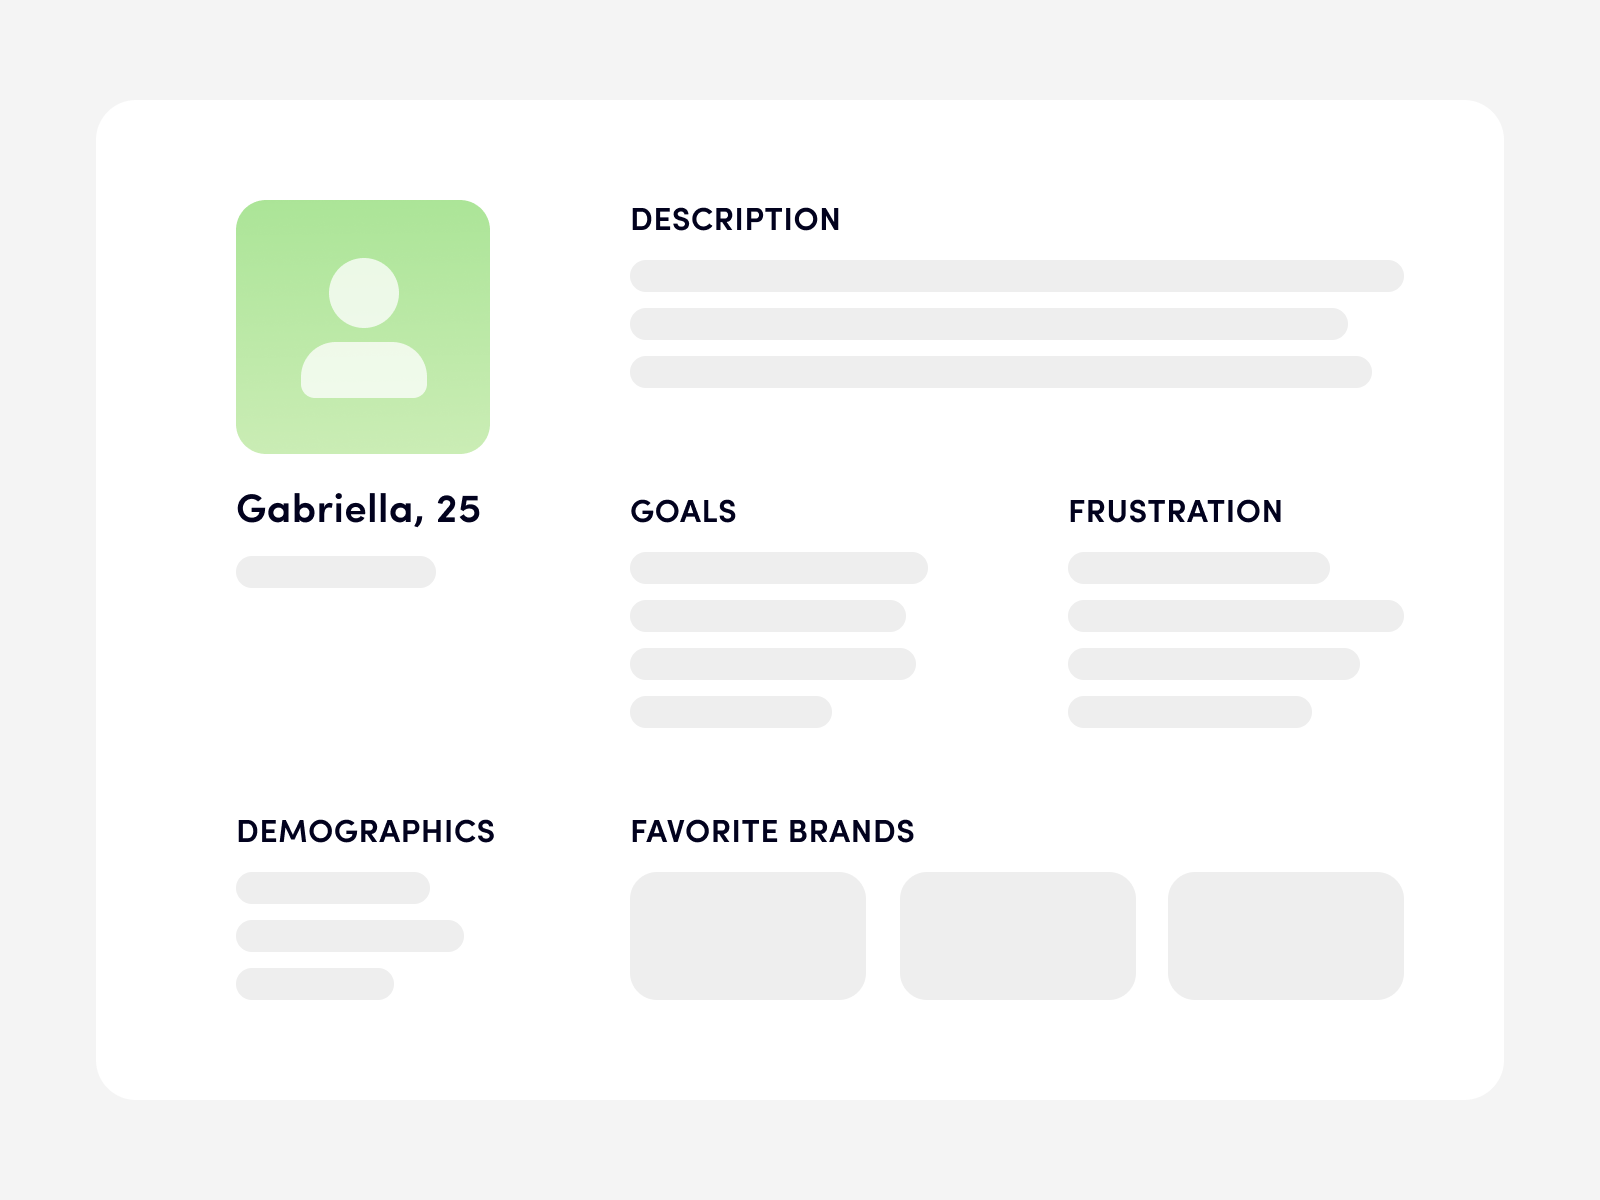 By creating user personas, product developers can better understand their target users